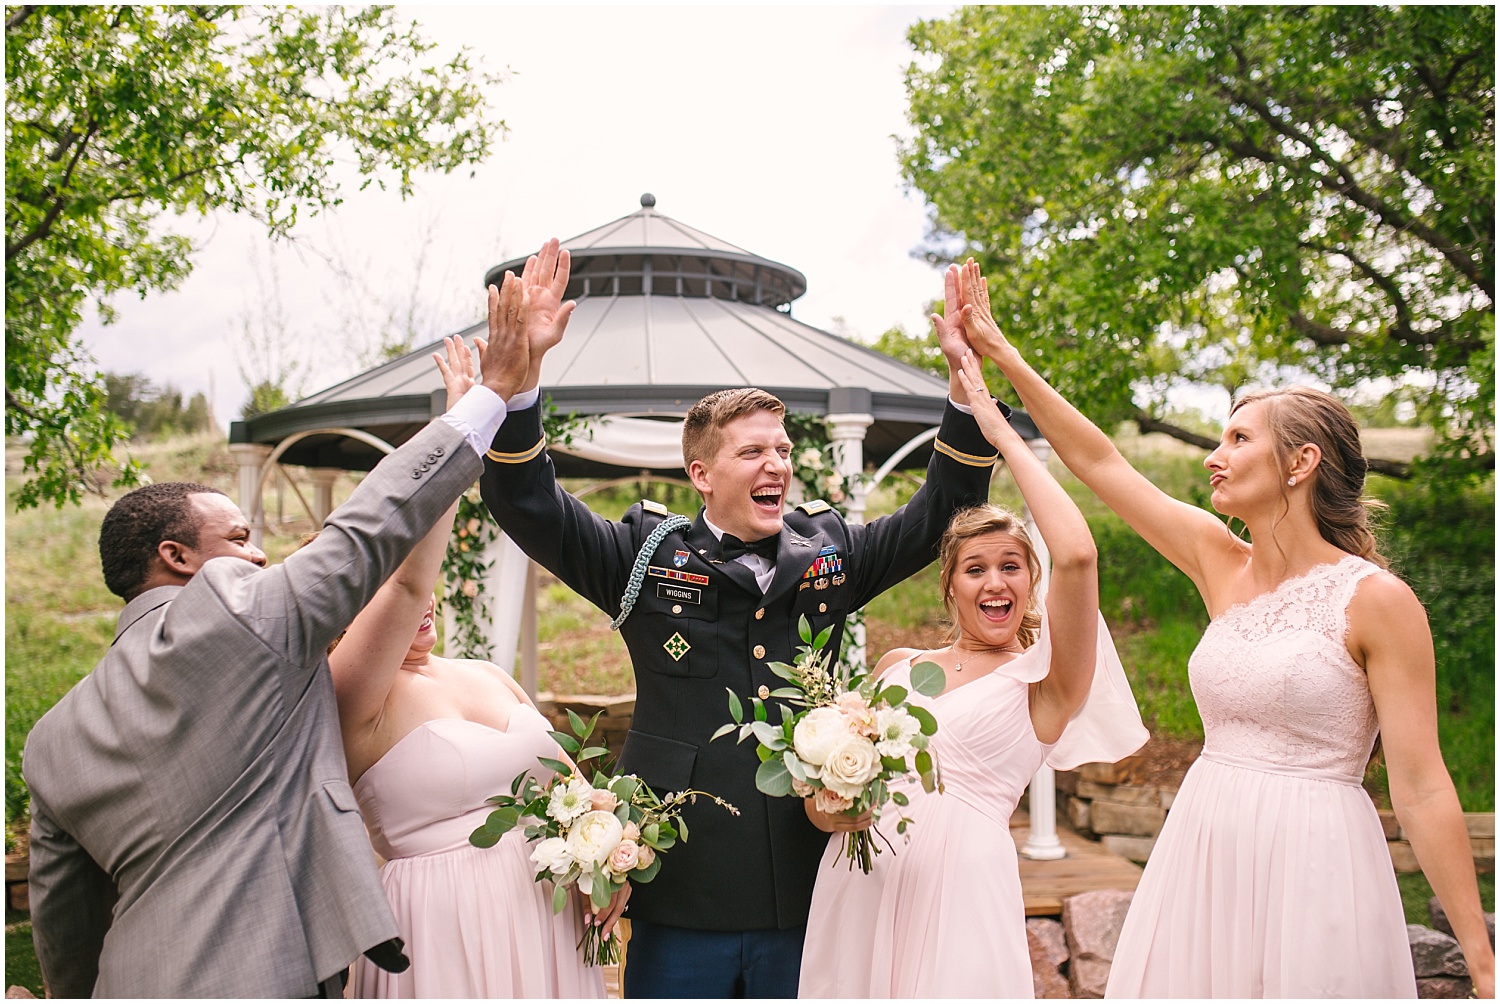 Groom high fives bridal party before wedding at Creekside Event Center